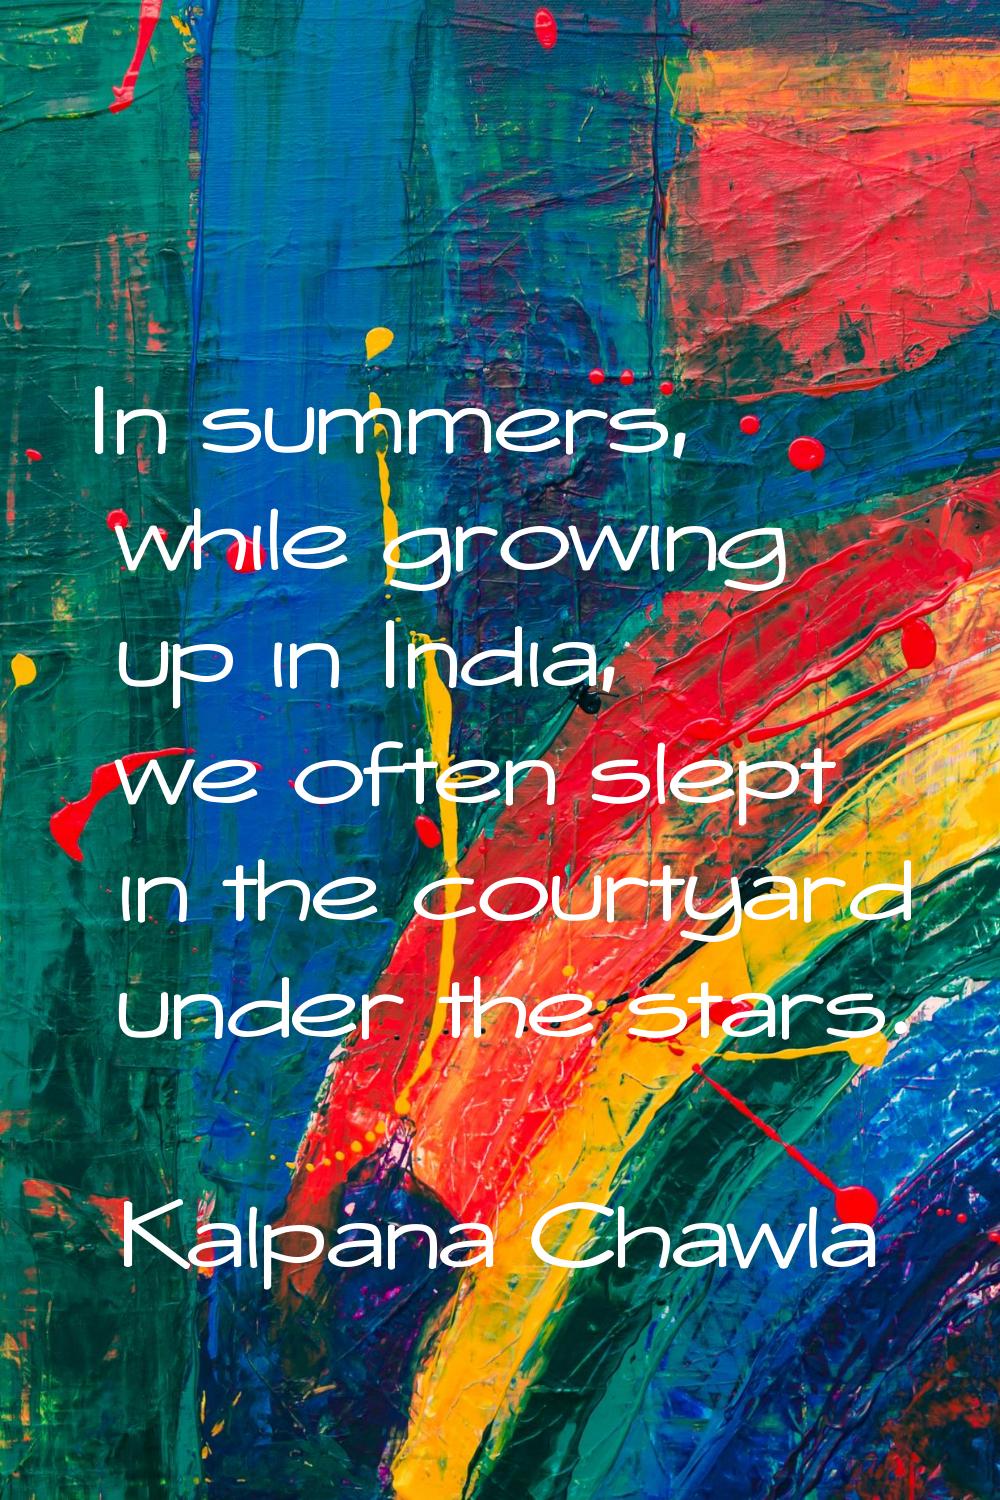 In summers, while growing up in India, we often slept in the courtyard under the stars.